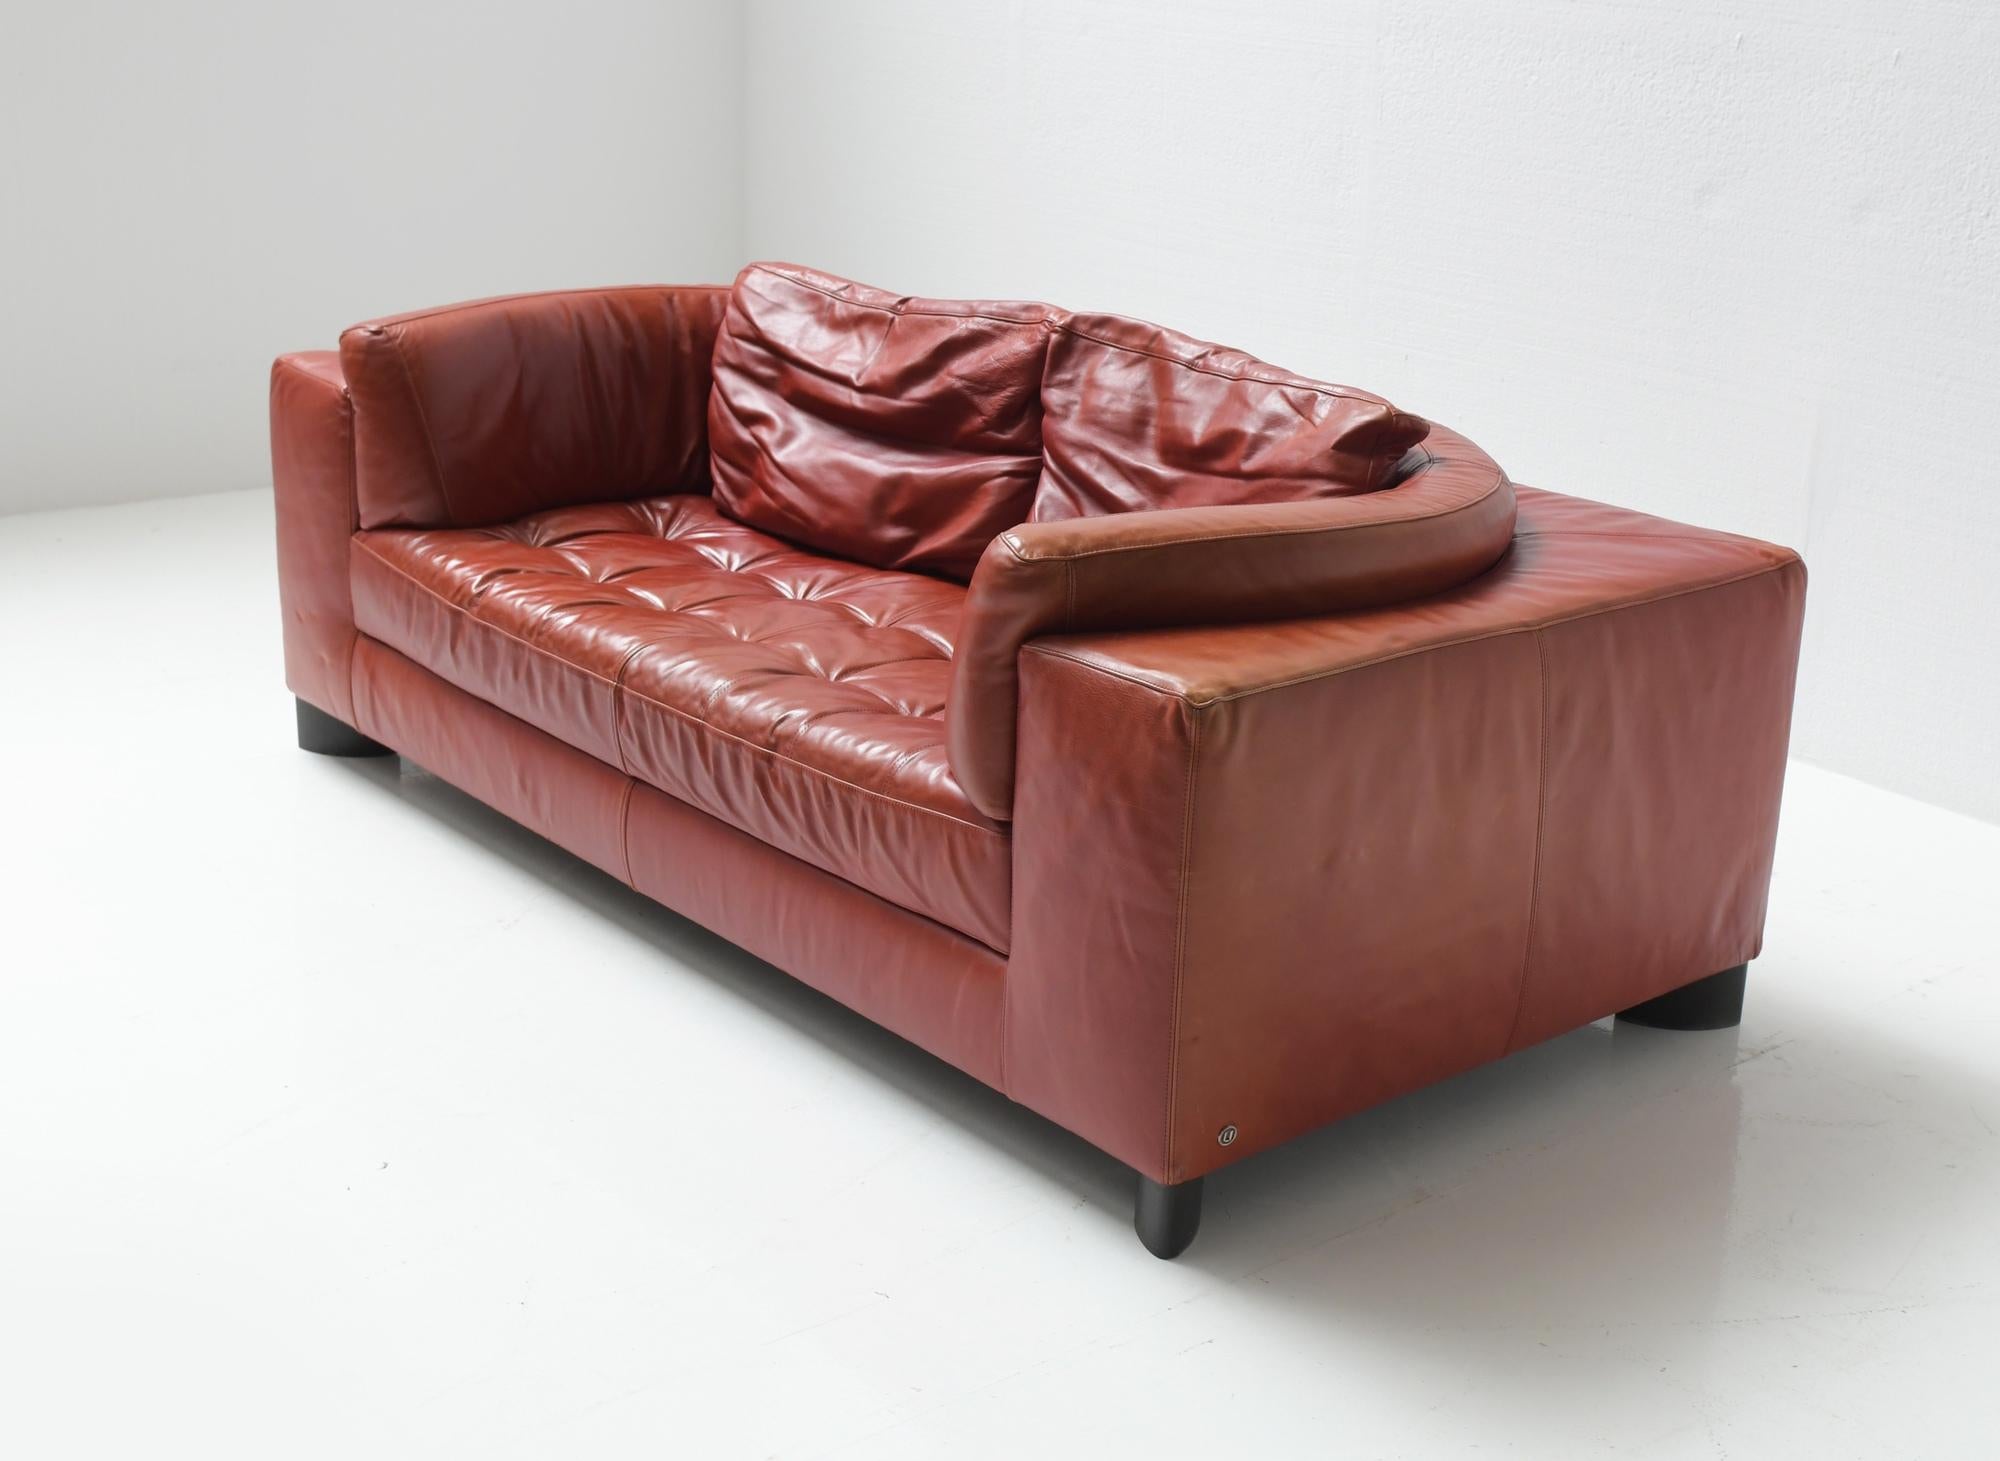 Rare vintage loveseat in its original oxblood leather with a stunning patina.
Produced by Natuzzi Italy

Good vintage condition.